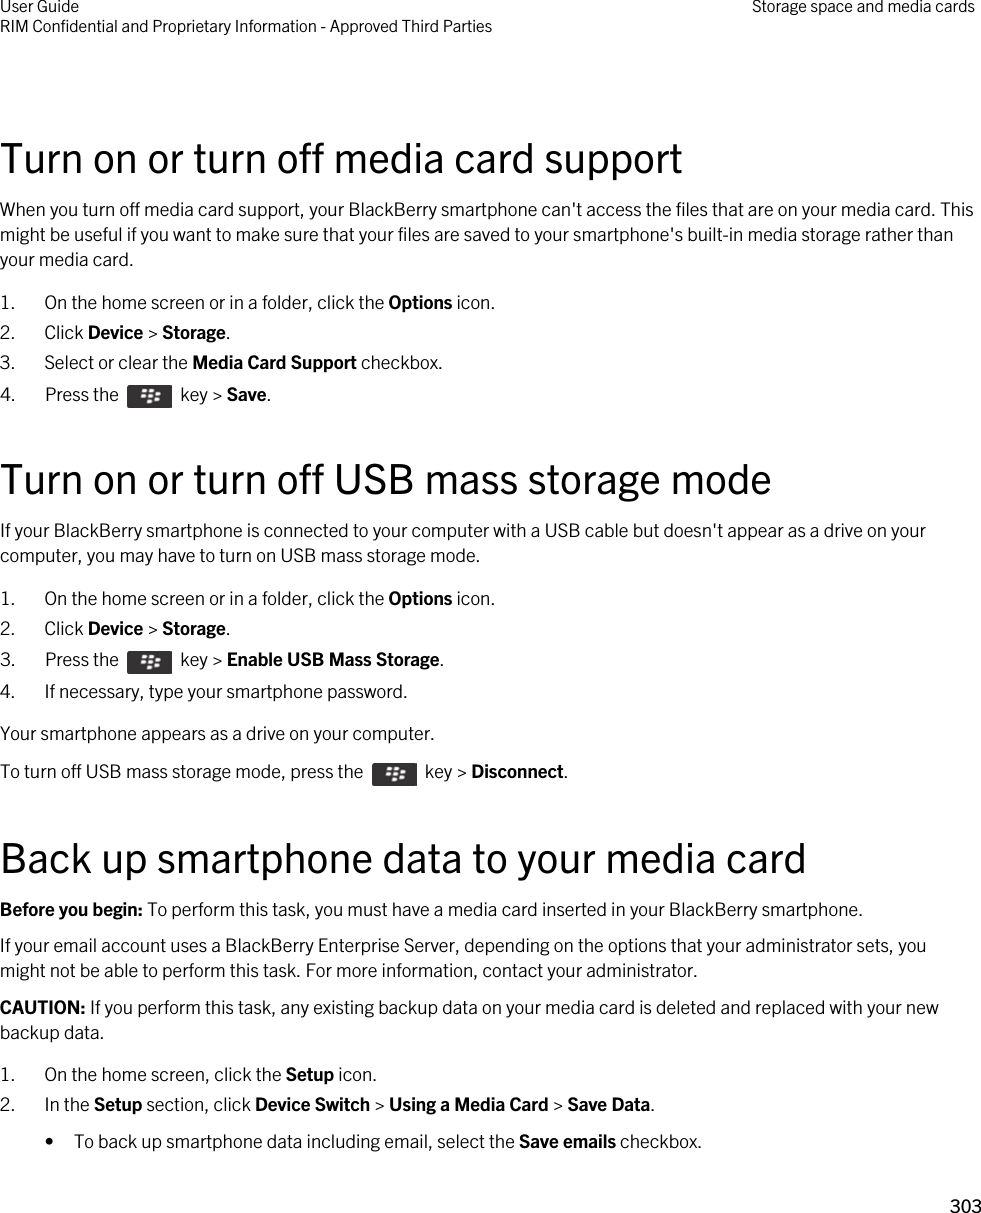  Turn on or turn off media card supportWhen you turn off media card support, your BlackBerry smartphone can&apos;t access the files that are on your media card. This might be useful if you want to make sure that your files are saved to your smartphone&apos;s built-in media storage rather than your media card.1. On the home screen or in a folder, click the Options icon.2. Click Device &gt; Storage.3. Select or clear the Media Card Support checkbox.4.  Press the    key &gt; Save. Turn on or turn off USB mass storage modeIf your BlackBerry smartphone is connected to your computer with a USB cable but doesn&apos;t appear as a drive on your computer, you may have to turn on USB mass storage mode.1. On the home screen or in a folder, click the Options icon.2. Click Device &gt; Storage.3.  Press the    key &gt; Enable USB Mass Storage. 4. If necessary, type your smartphone password.Your smartphone appears as a drive on your computer.To turn off USB mass storage mode, press the    key &gt; Disconnect.Back up smartphone data to your media cardBefore you begin: To perform this task, you must have a media card inserted in your BlackBerry smartphone.If your email account uses a BlackBerry Enterprise Server, depending on the options that your administrator sets, you might not be able to perform this task. For more information, contact your administrator.CAUTION: If you perform this task, any existing backup data on your media card is deleted and replaced with your new backup data.1. On the home screen, click the Setup icon.2. In the Setup section, click Device Switch &gt; Using a Media Card &gt; Save Data.• To back up smartphone data including email, select the Save emails checkbox.User GuideRIM Confidential and Proprietary Information - Approved Third Parties Storage space and media cards303 